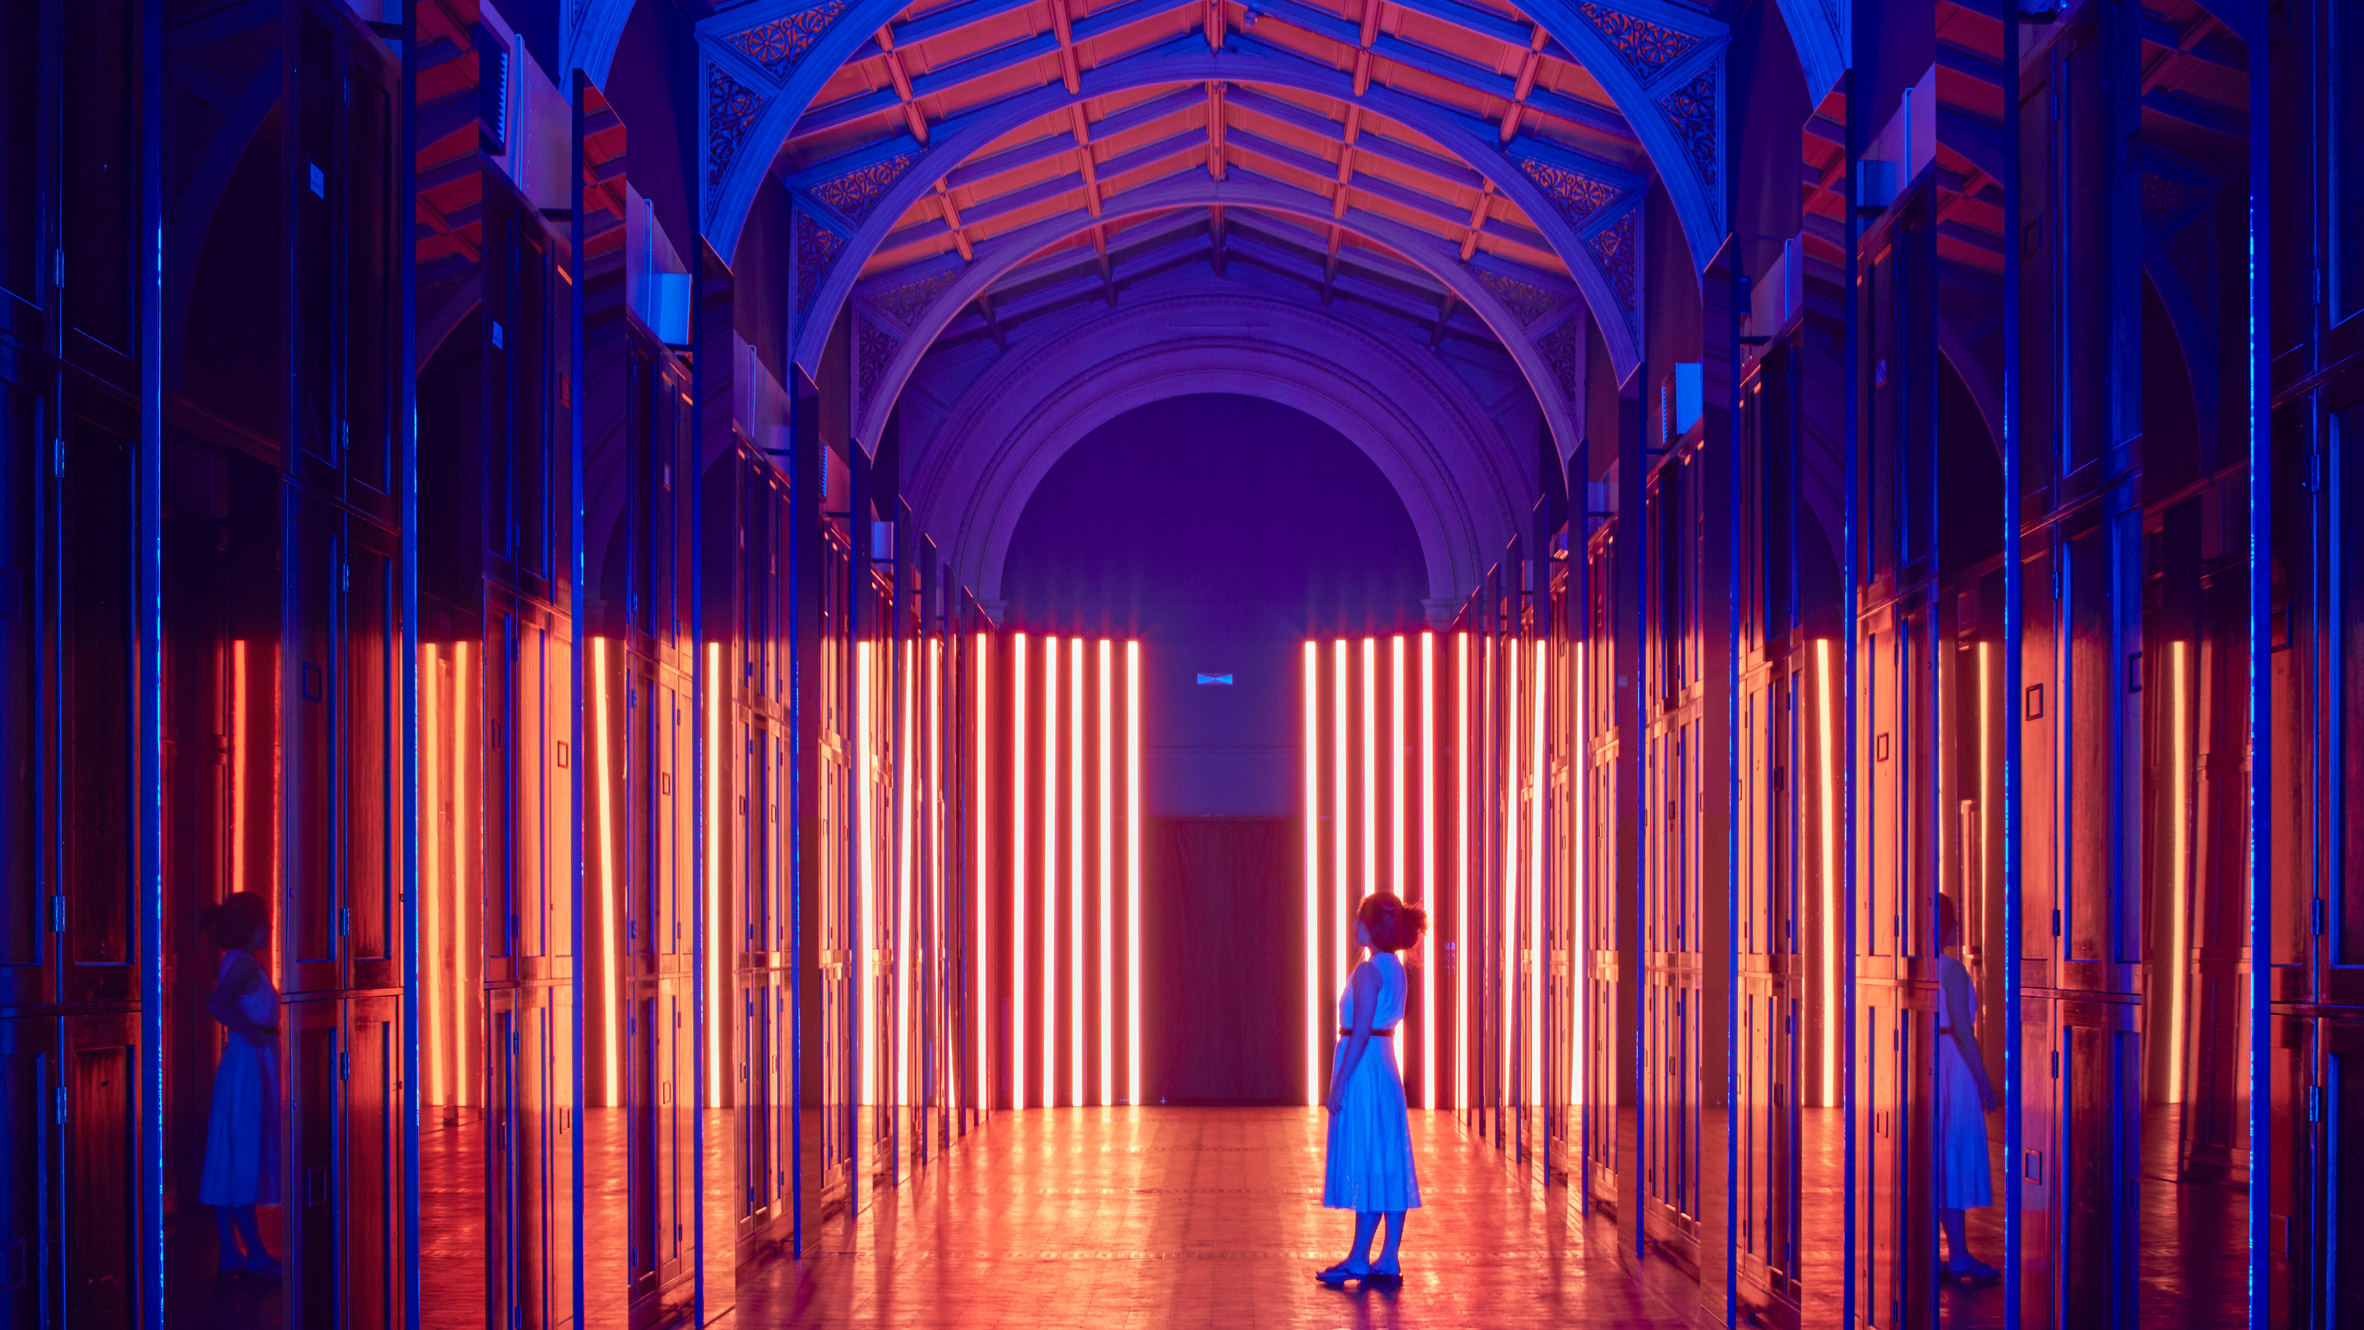 Flynn Talbot transforms V&A's former textile room into colourful ...